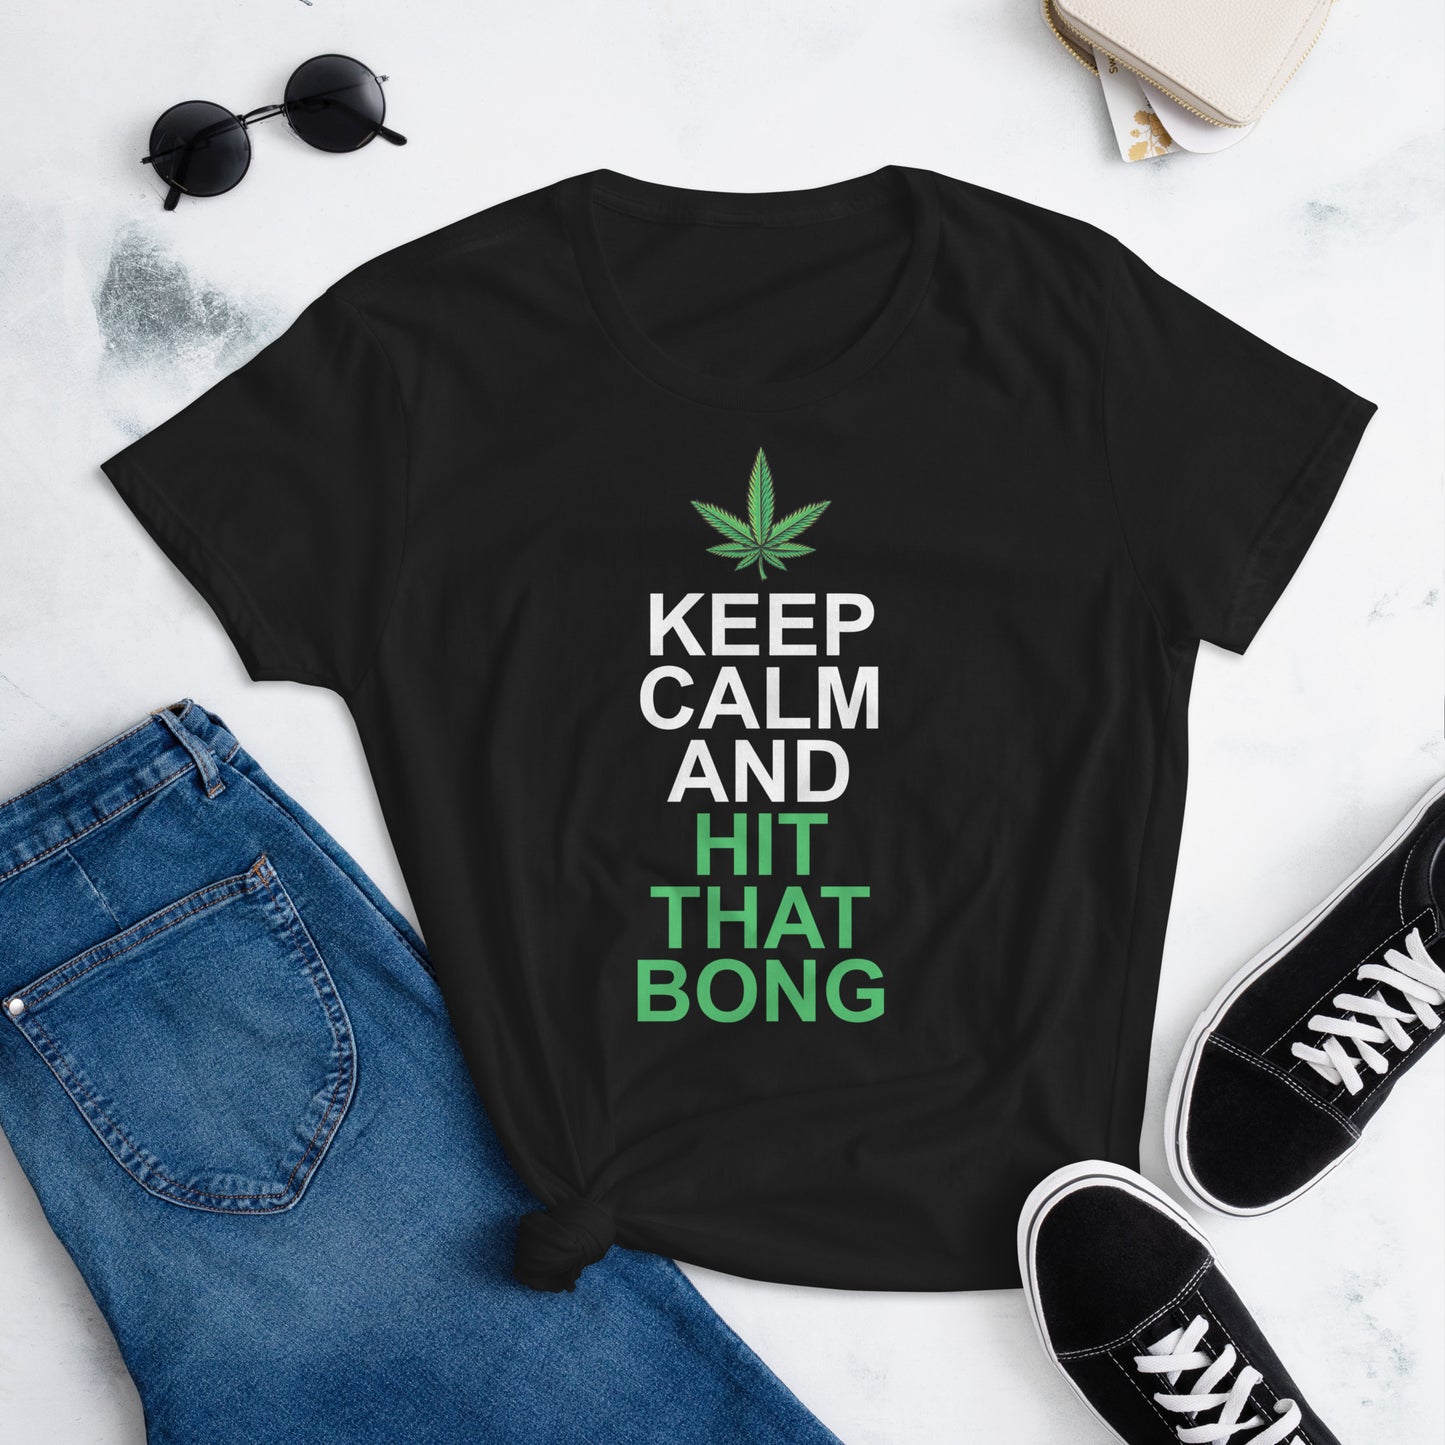 Keep Calm and hit the Bong - Women's T-Shirt | TheShirtfather